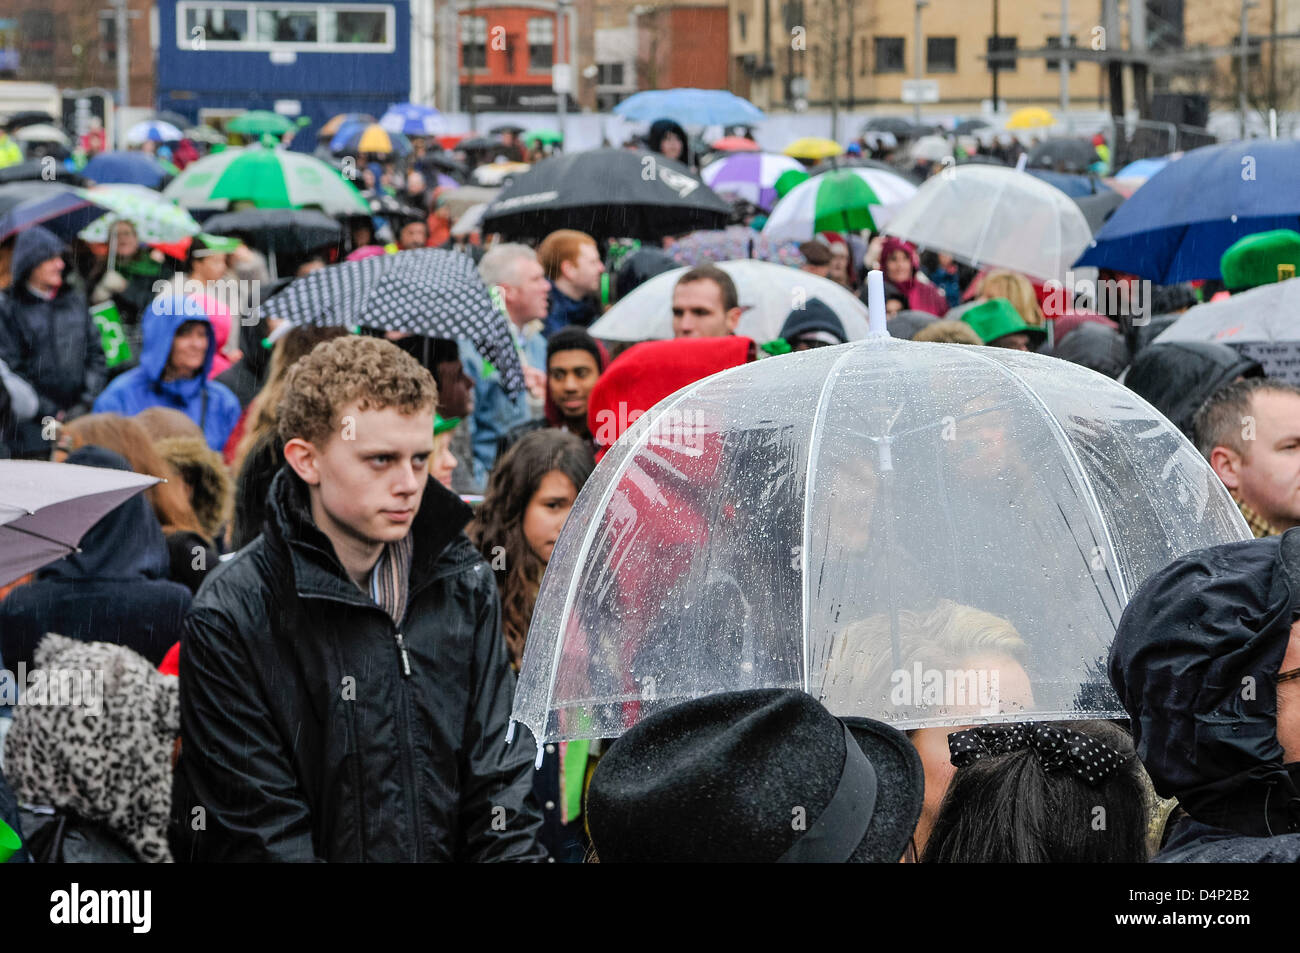 Audience members at an outdoor concert in heavy rain use umbrellas. Stock Photo